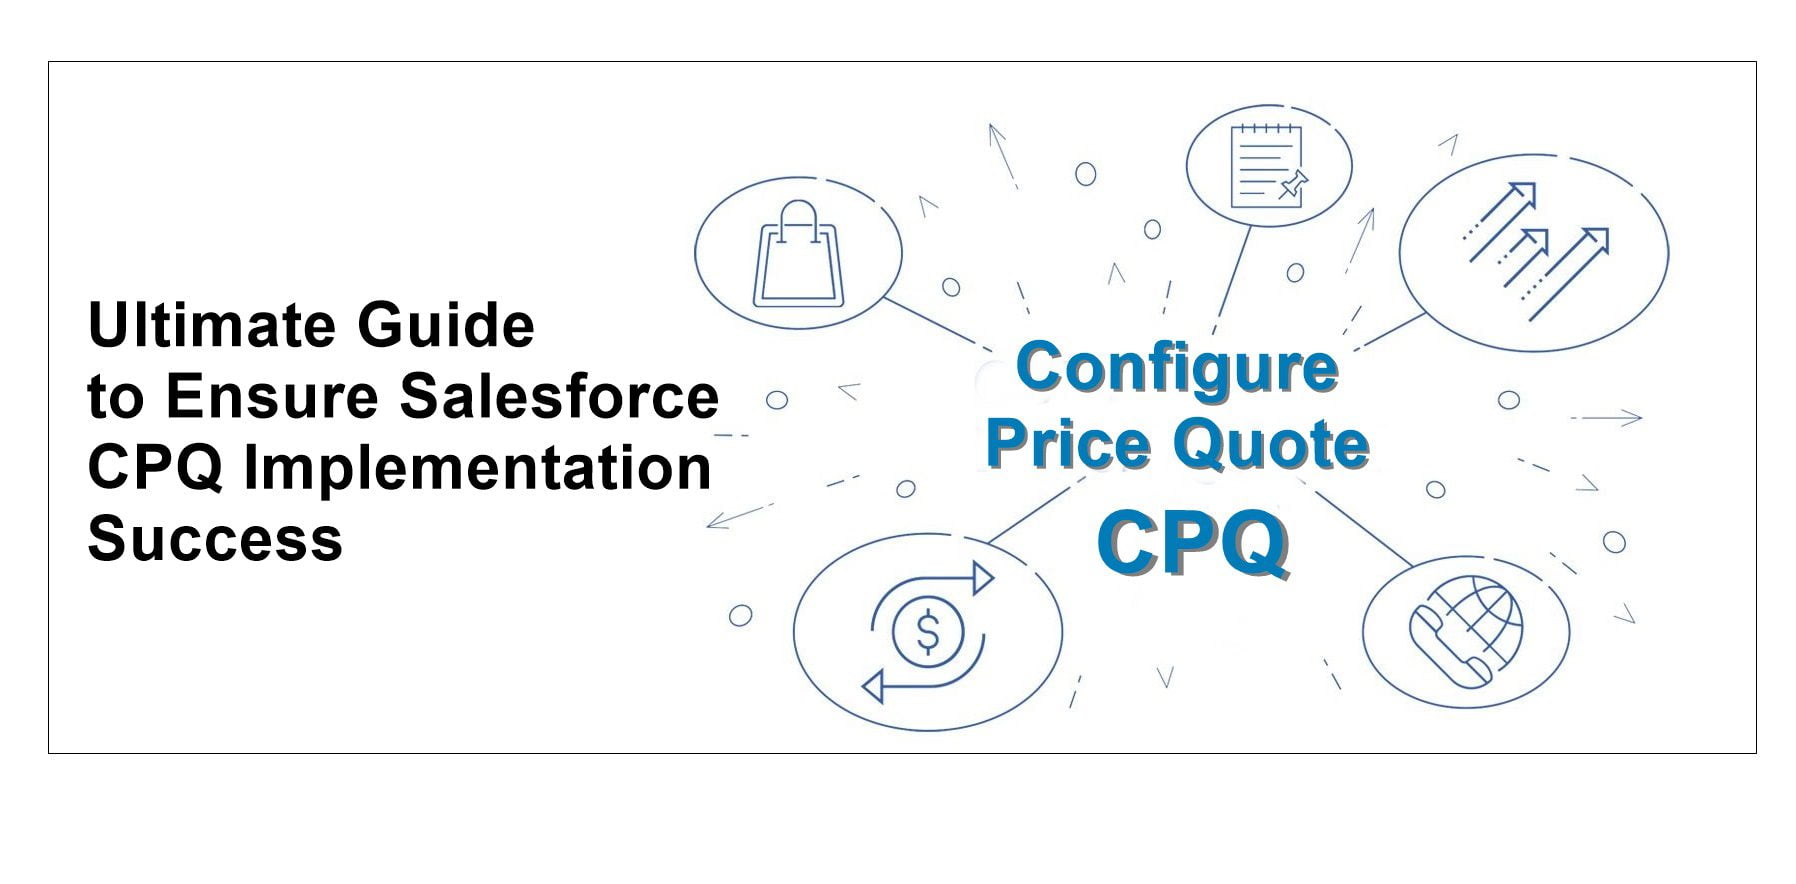 Ultimate Guide to Ensure Salesforce CPQ Implementa